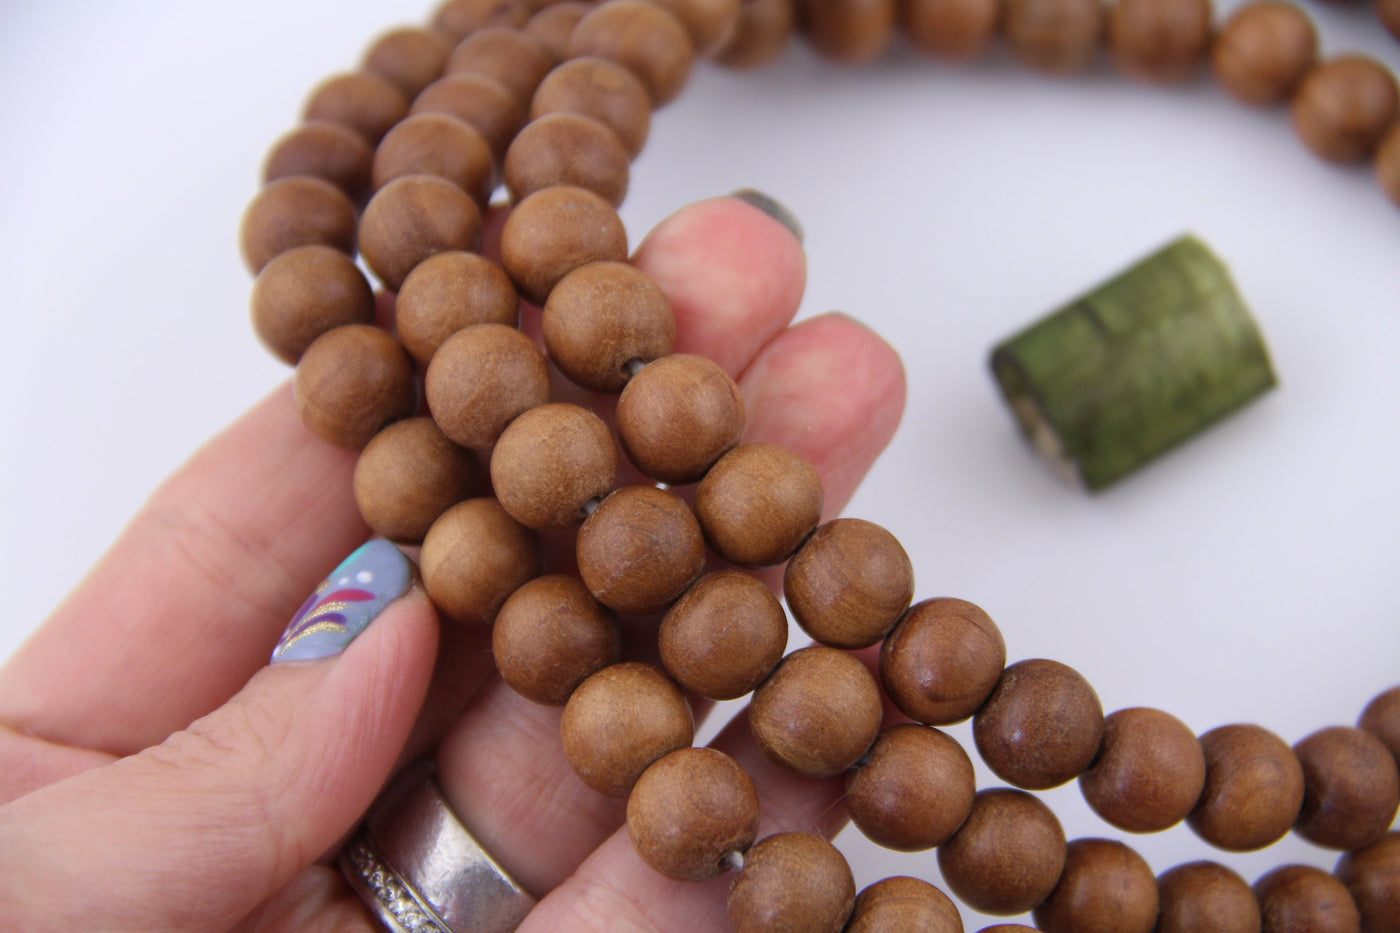 8mm Natural Aromatic Sandalwood Beads From India, 50 Loose Beads / Yoga,  Malas, Prayer Beads / Wood, Wooden Beads, Jewelry Supplies 